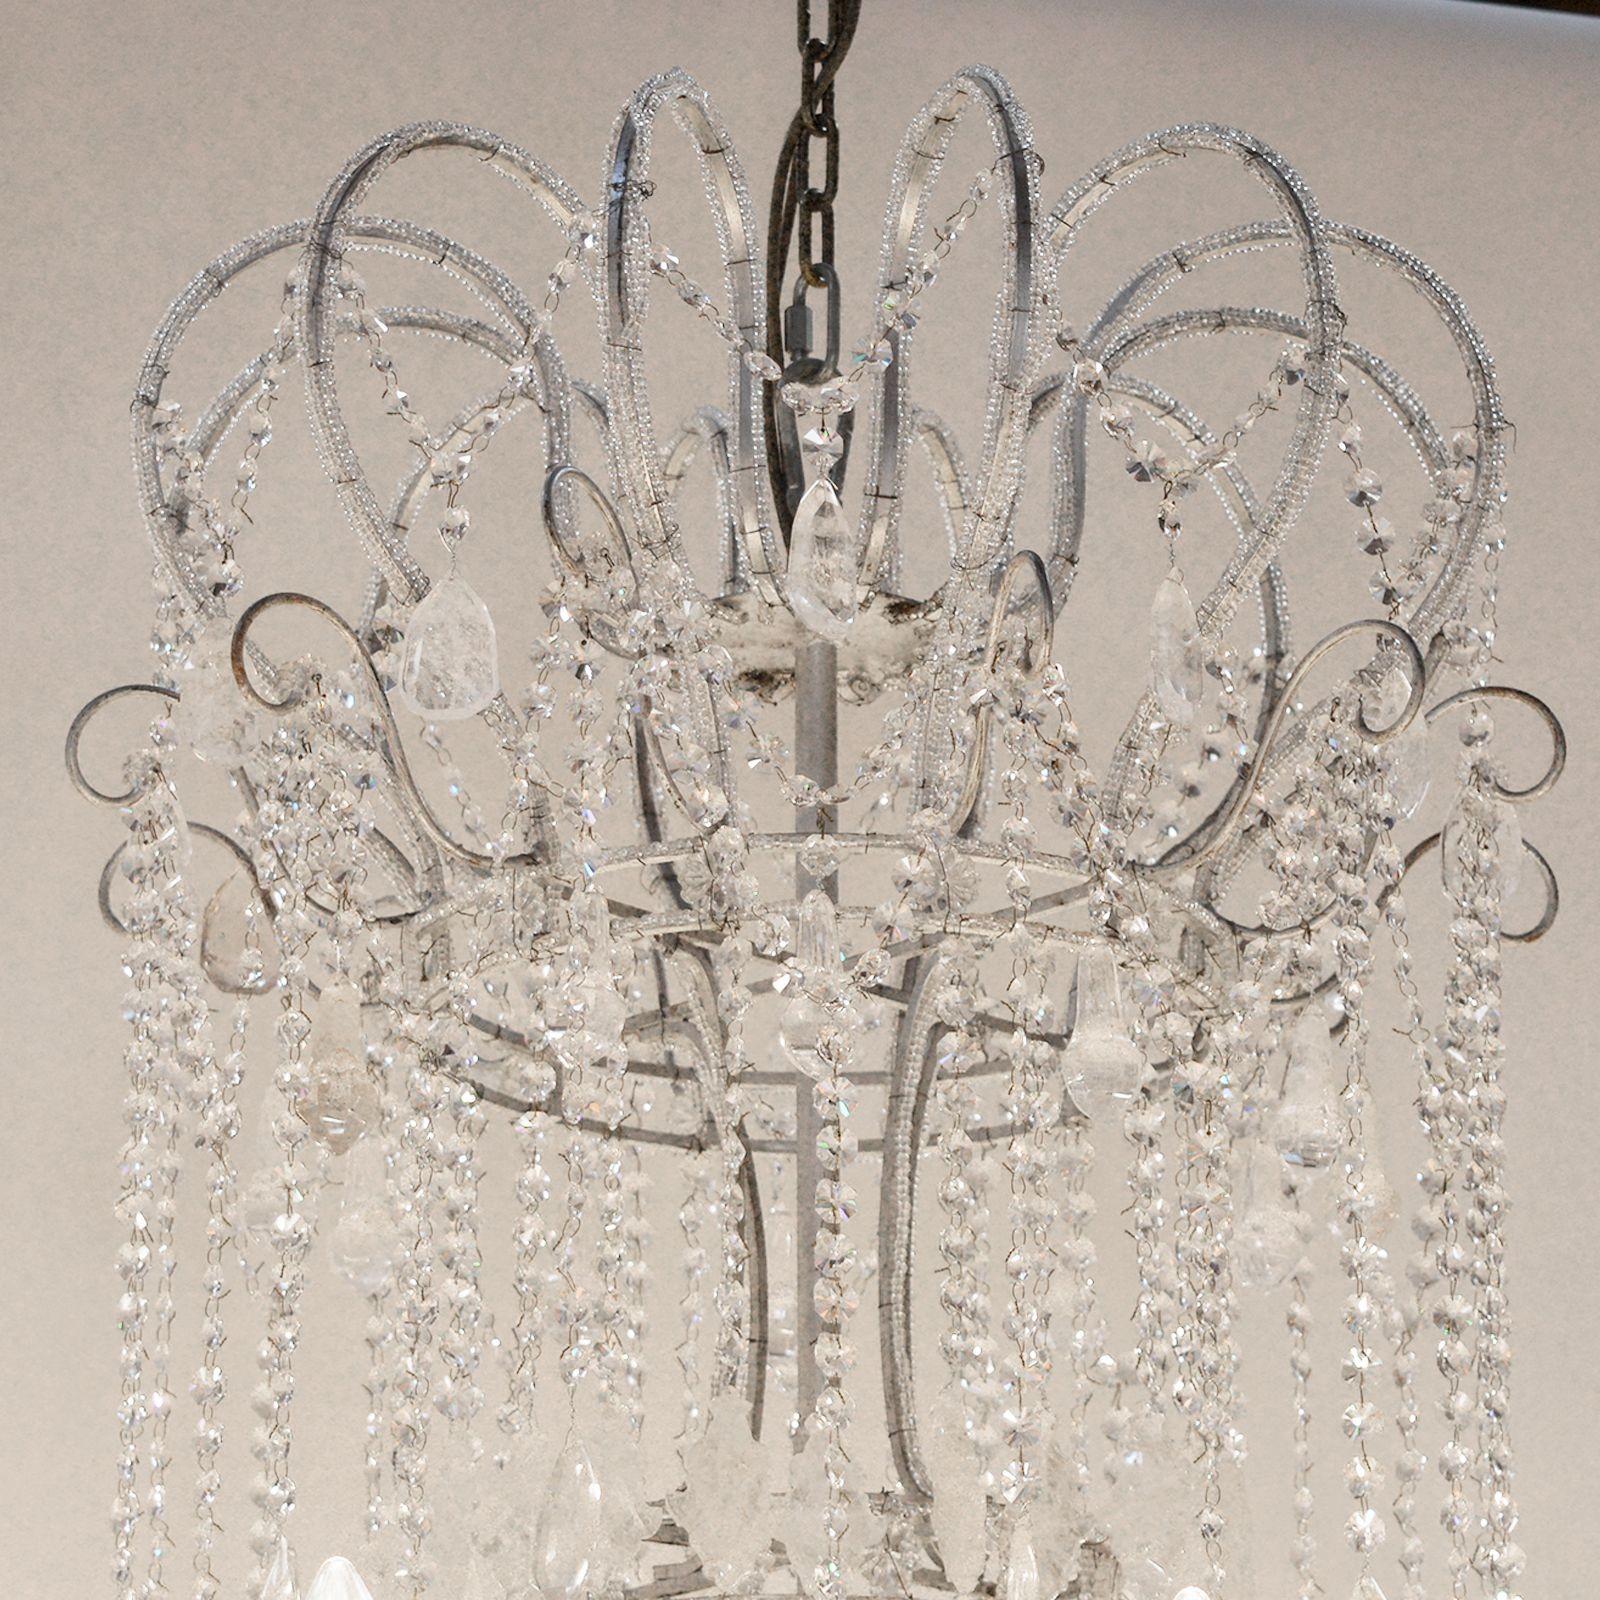 Glamorous Oversized Venetian Beading and Rock Crystal Chandelier. Italy, c. 1950 For Sale 2